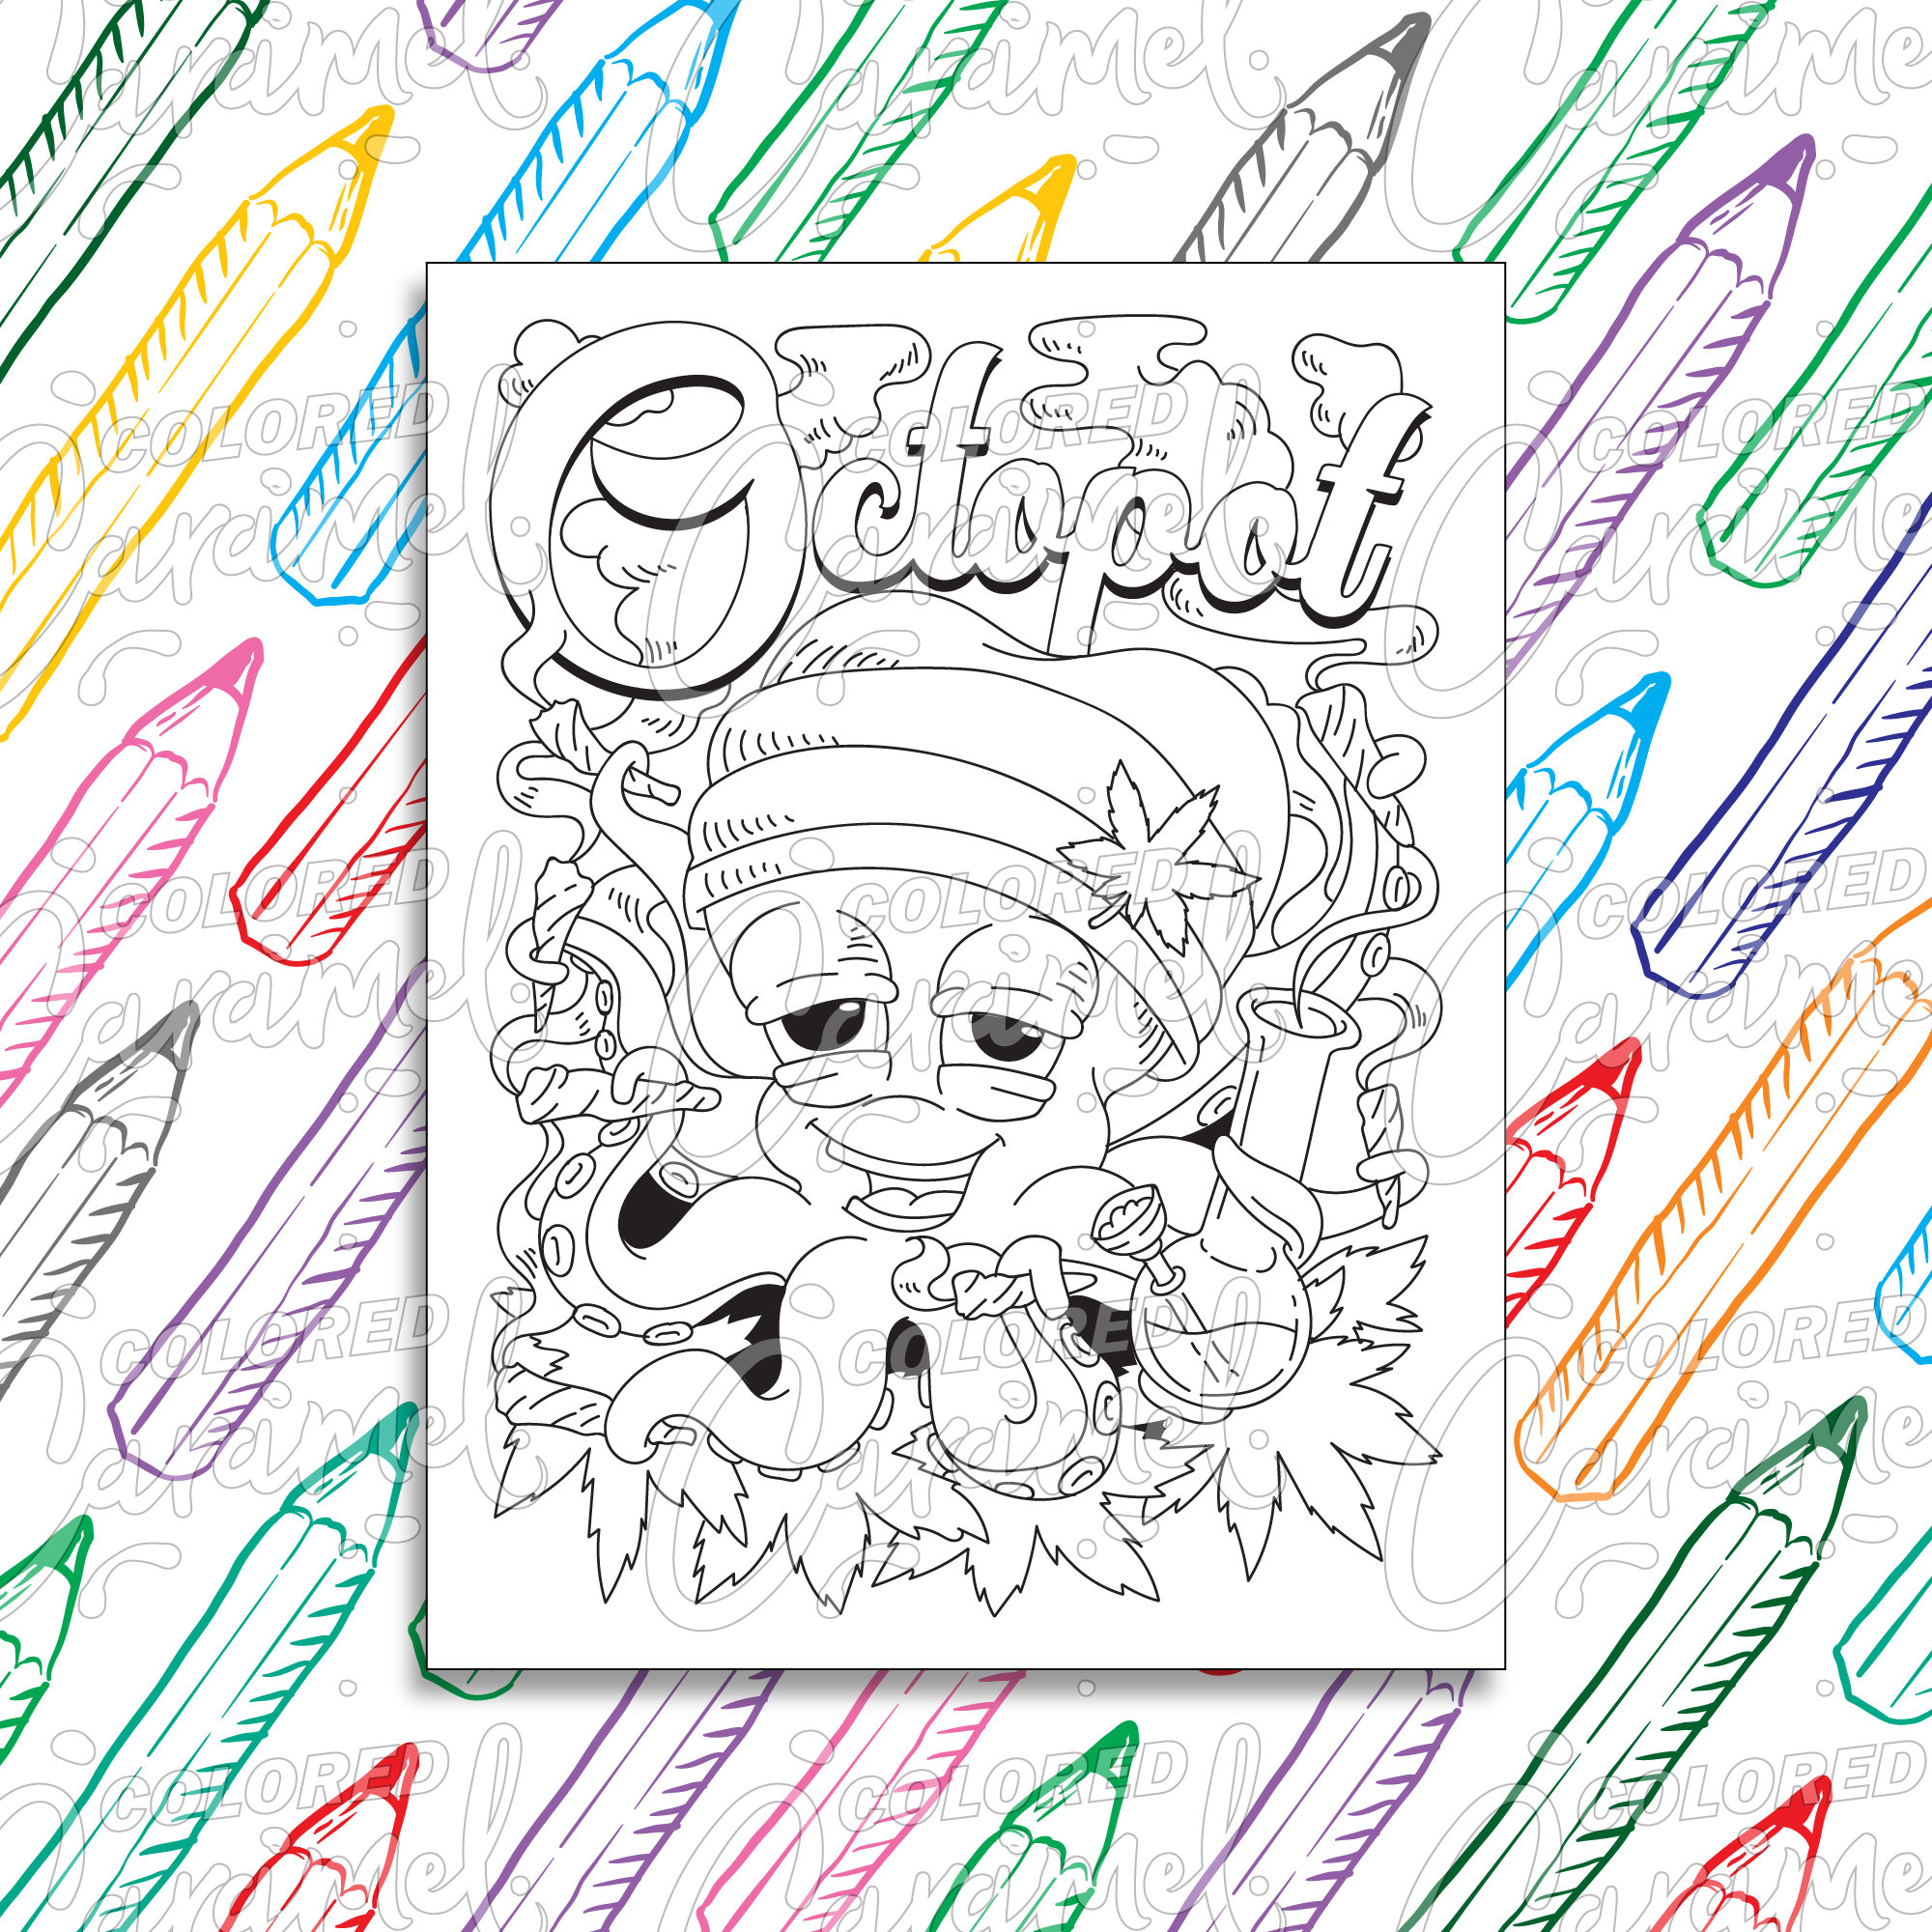 Stoner coloring page digital download pdf trippy funny and cool octopus smoking weed printable psychedelic drawing illustration